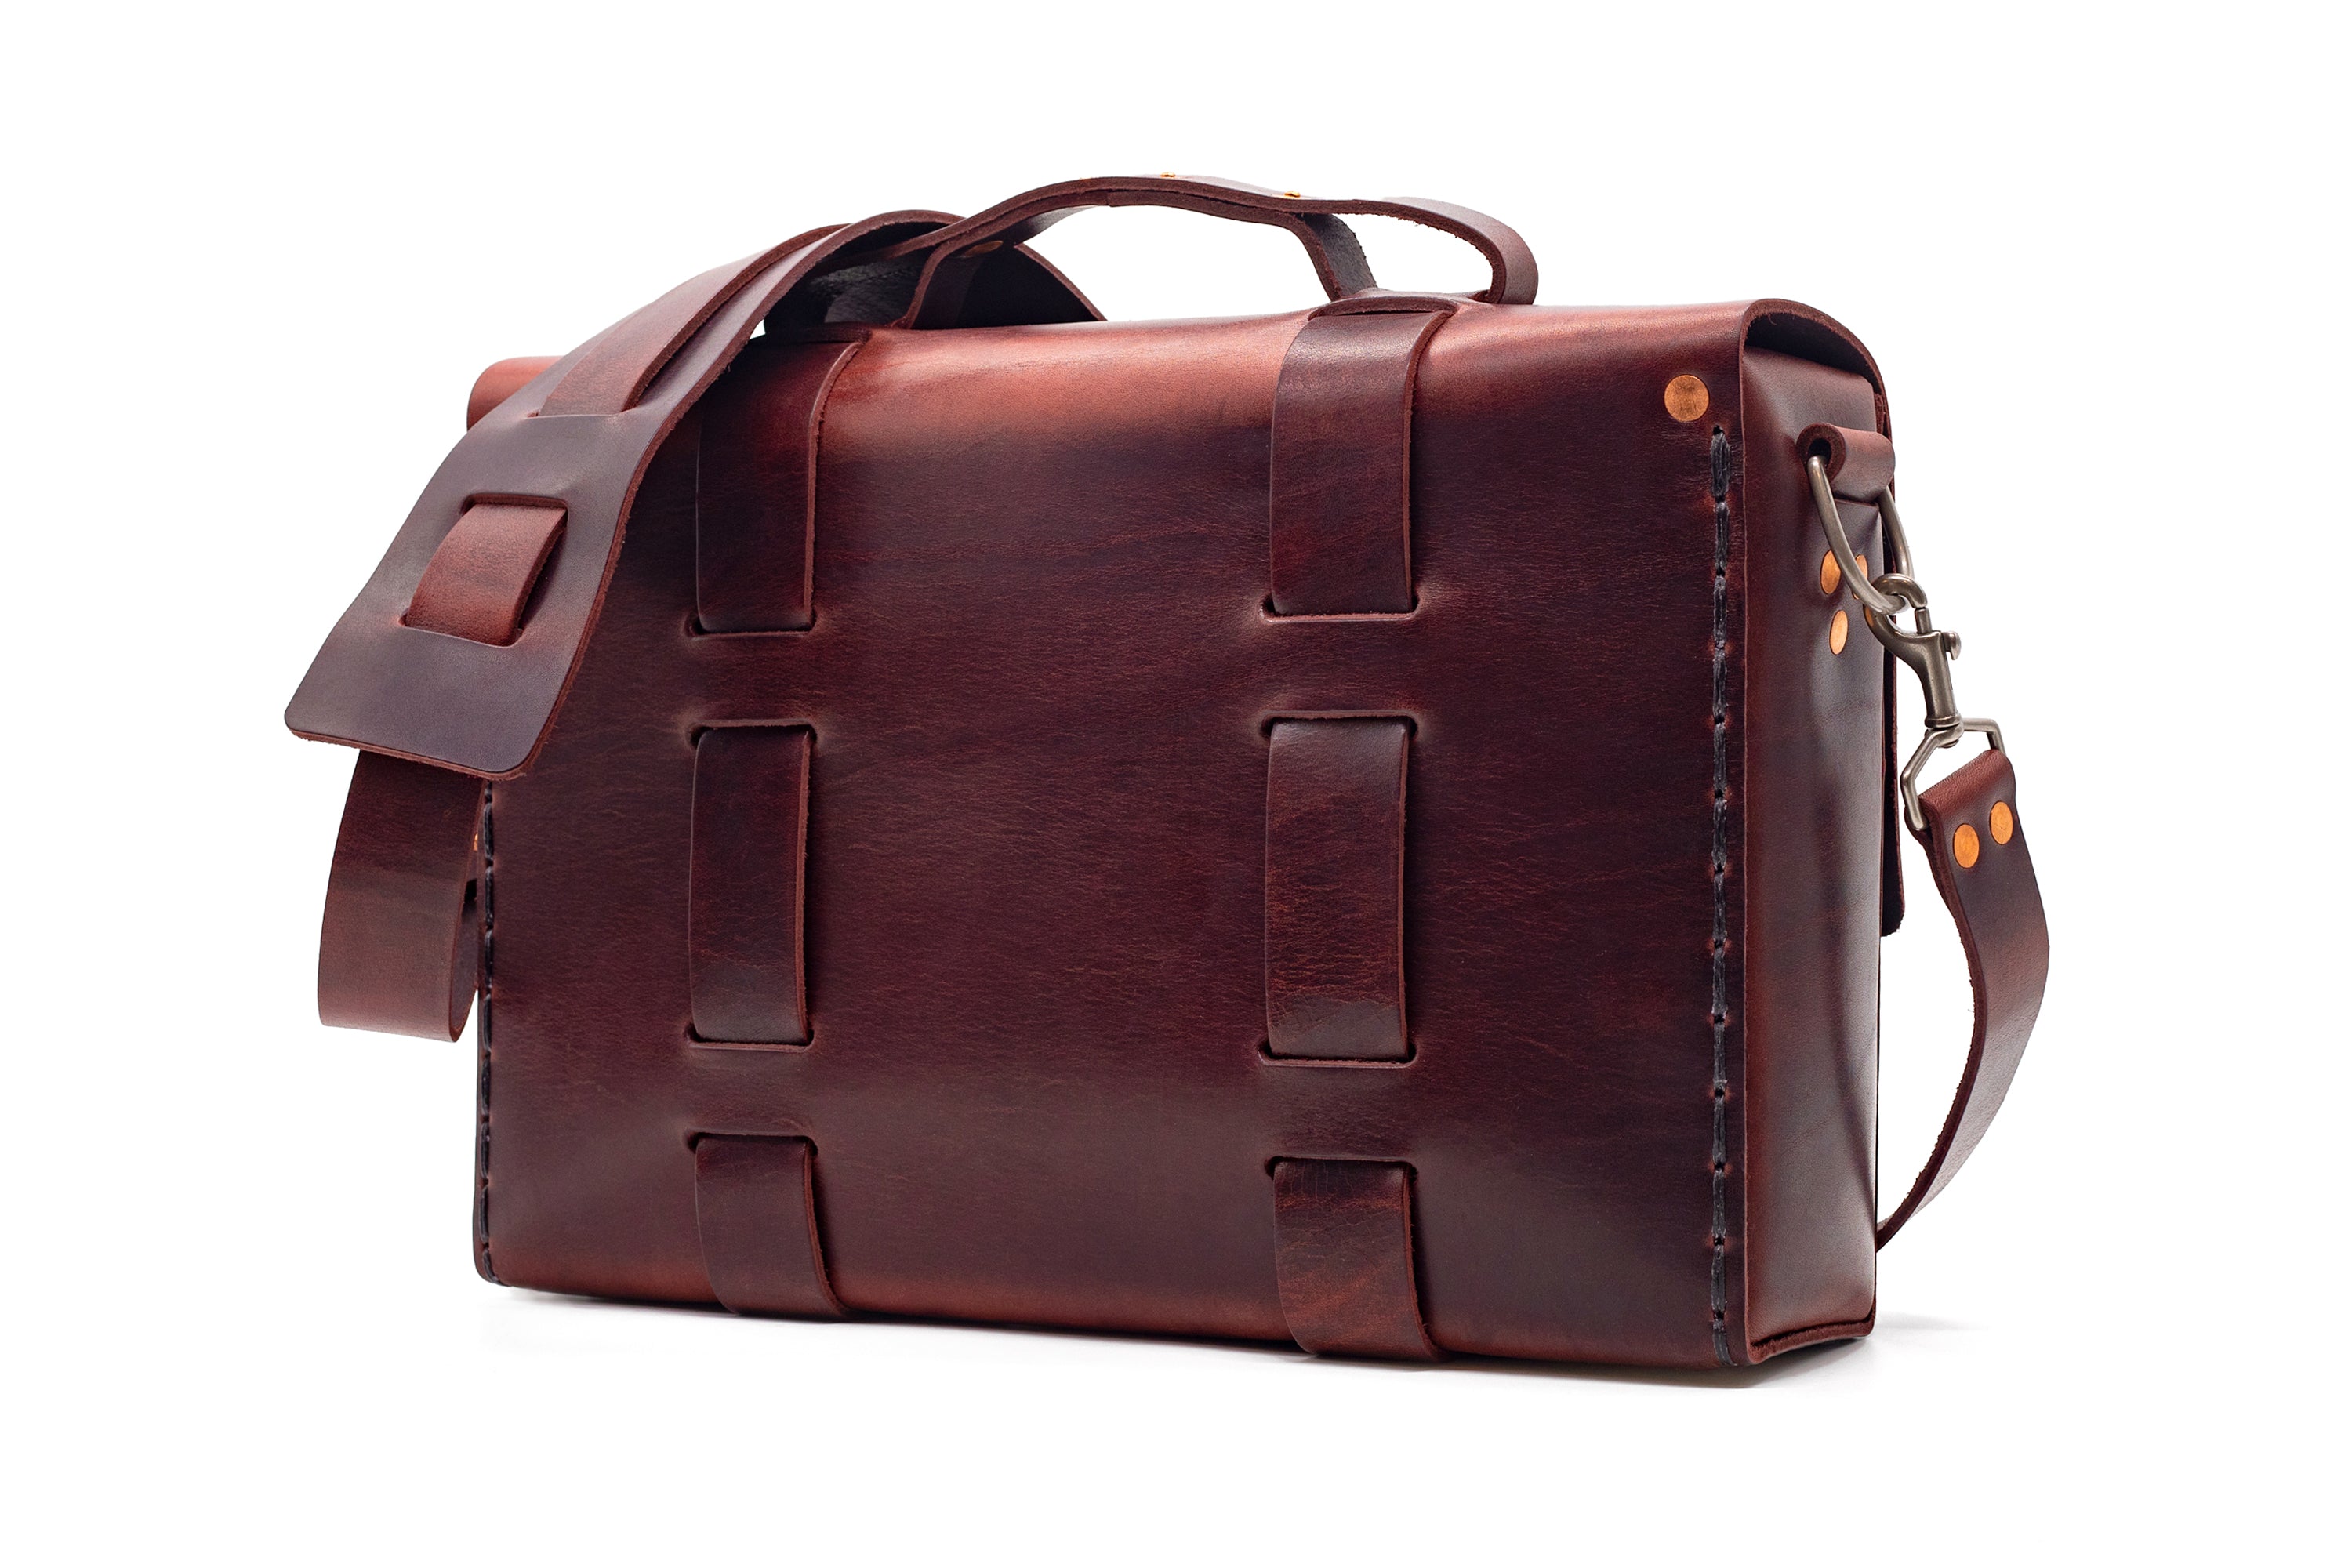 LIMITED EDITION NO. 4313 MINIMALIST STANDARD LEATHER SATCHEL IN BEAUMONT BROWN - ONLY 3 LEFT